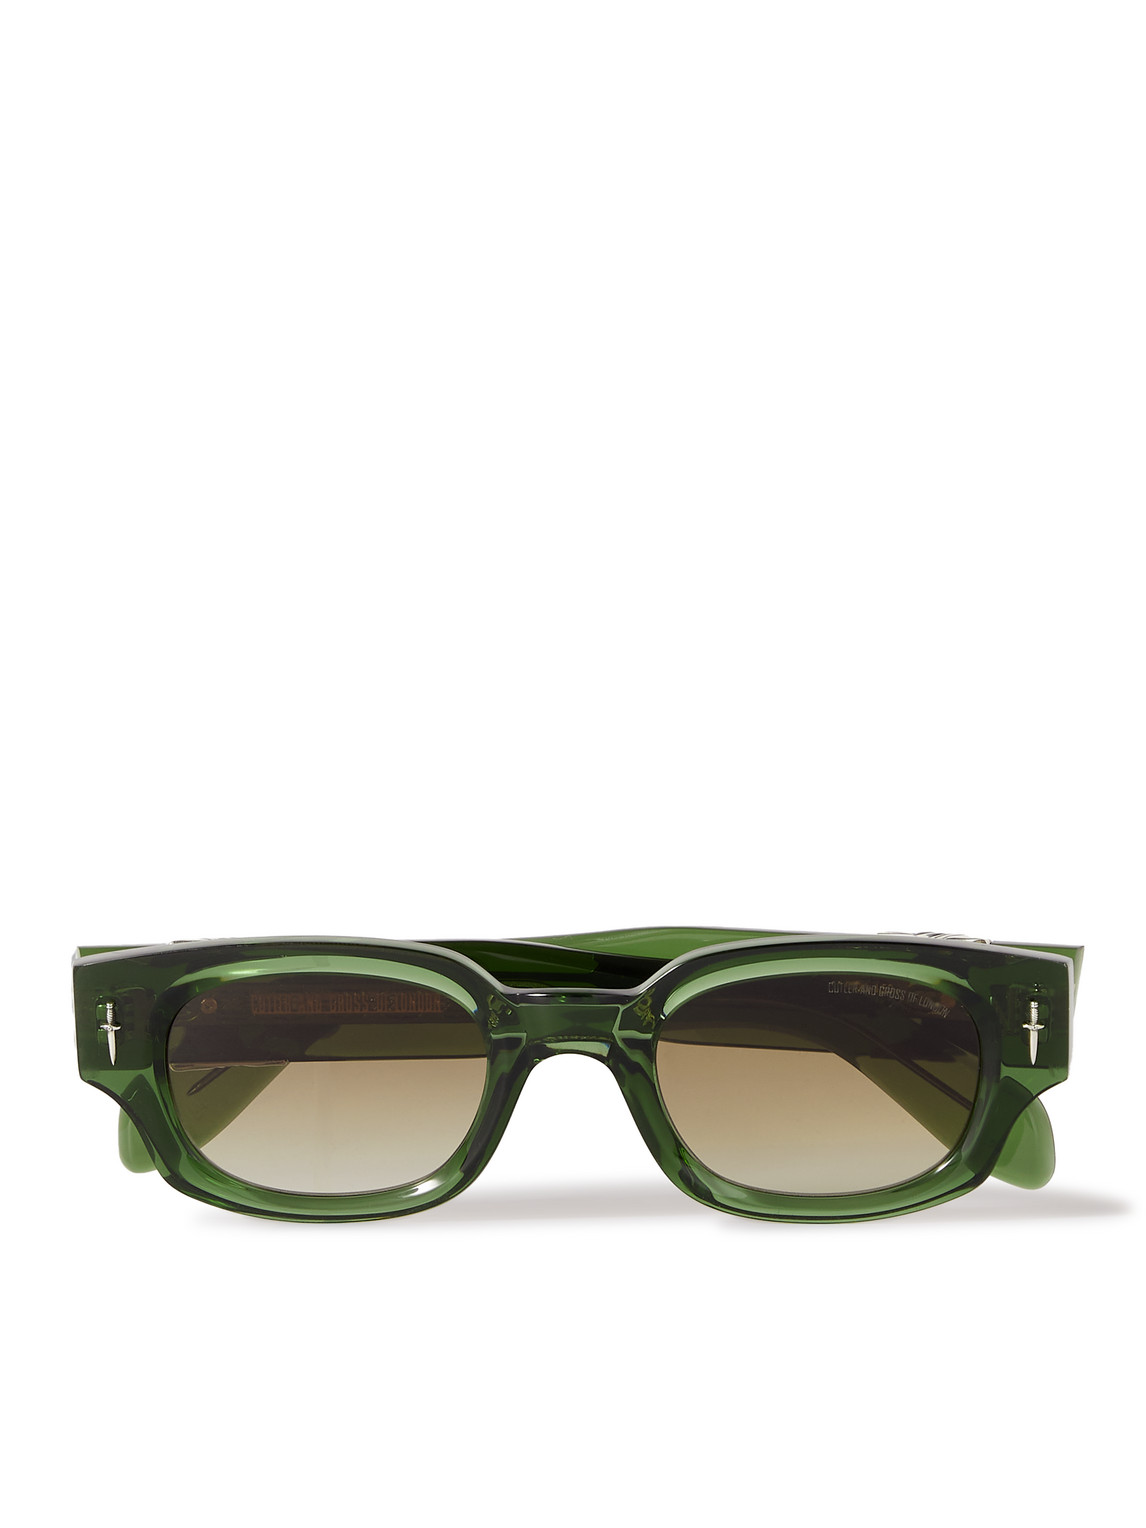 Cutler And Gross The Great Frog The Dagger D-frame Acetate Sunglasses In Green